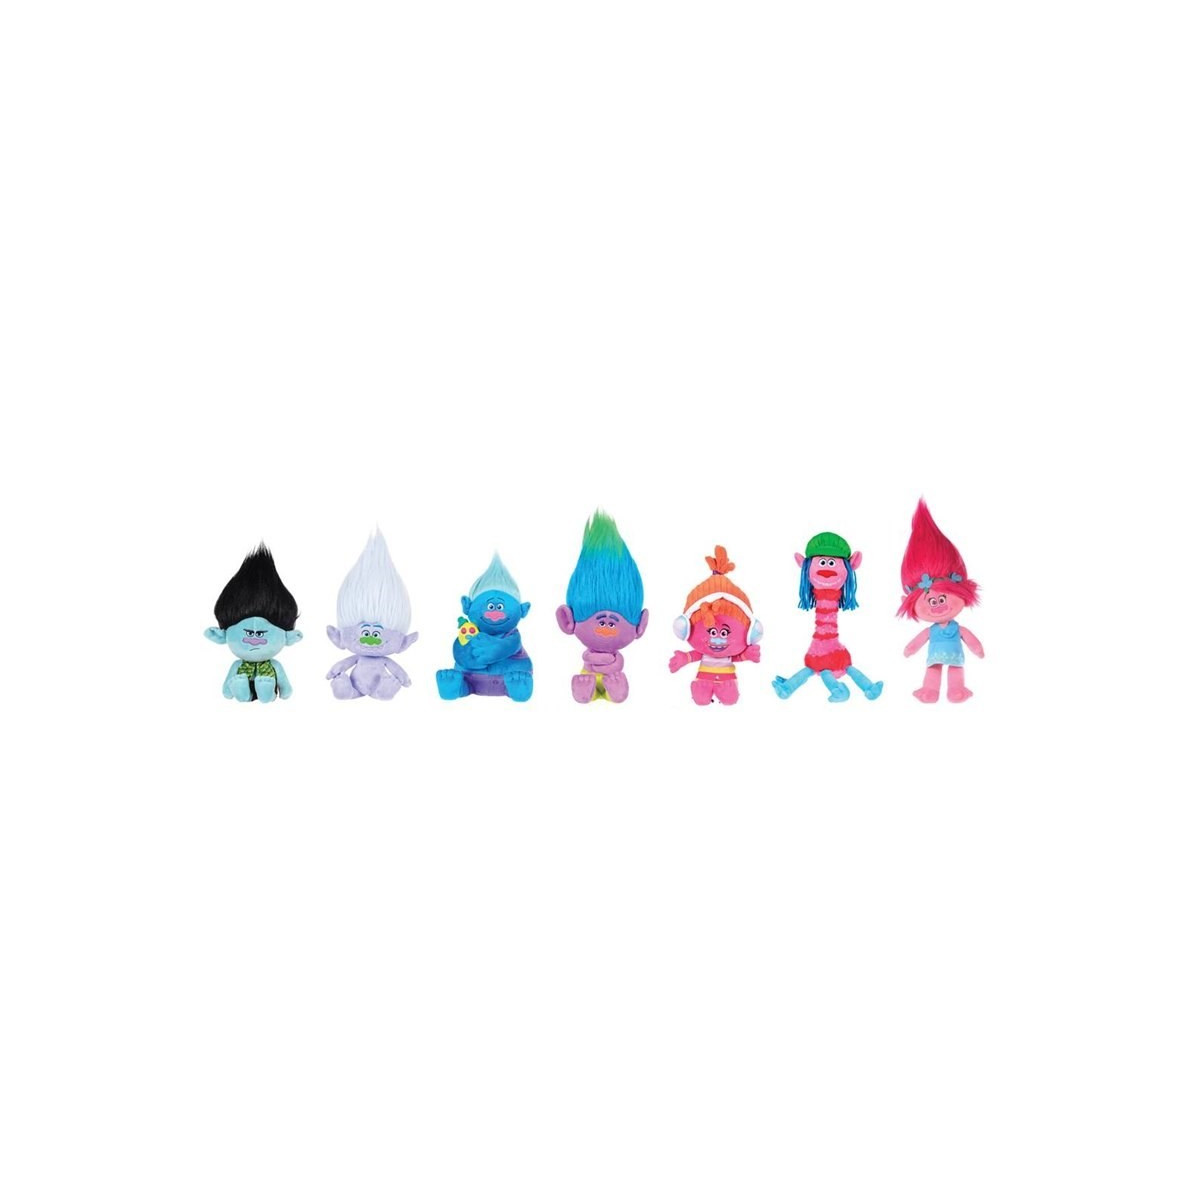 PELUCHE T300 SURTIDO TROLLS PLAY BY PLAY 1